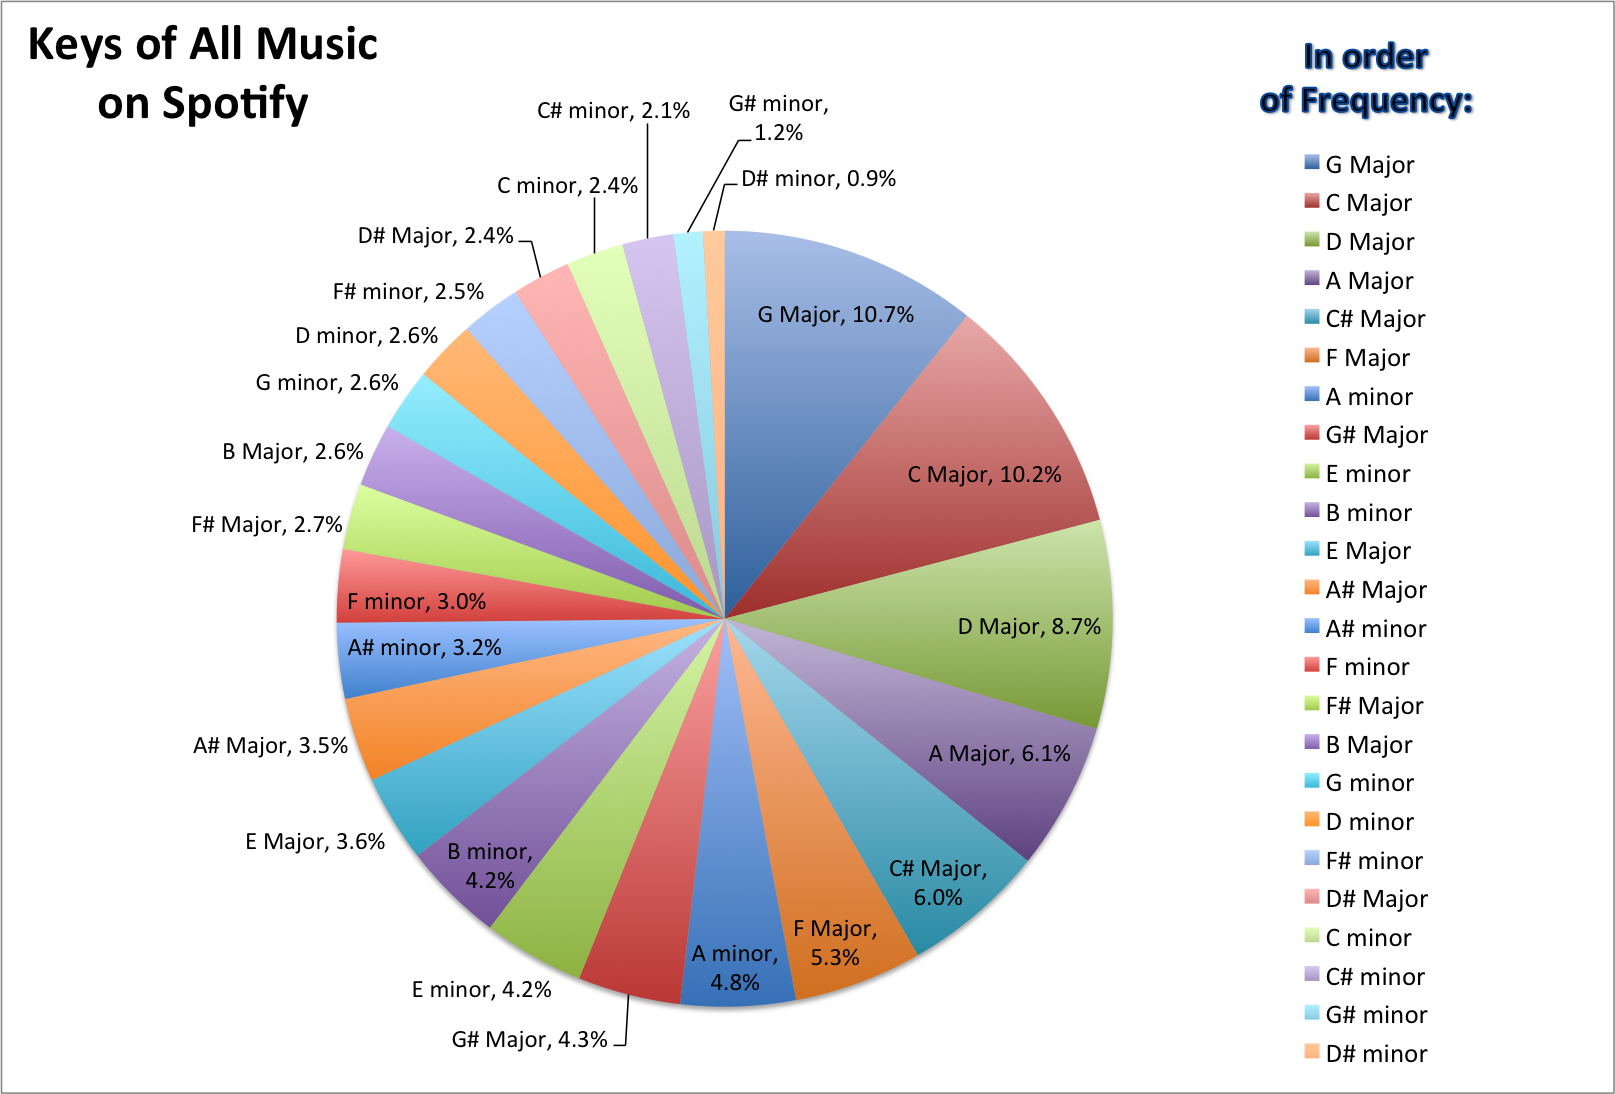 Most common keys by Spotify.